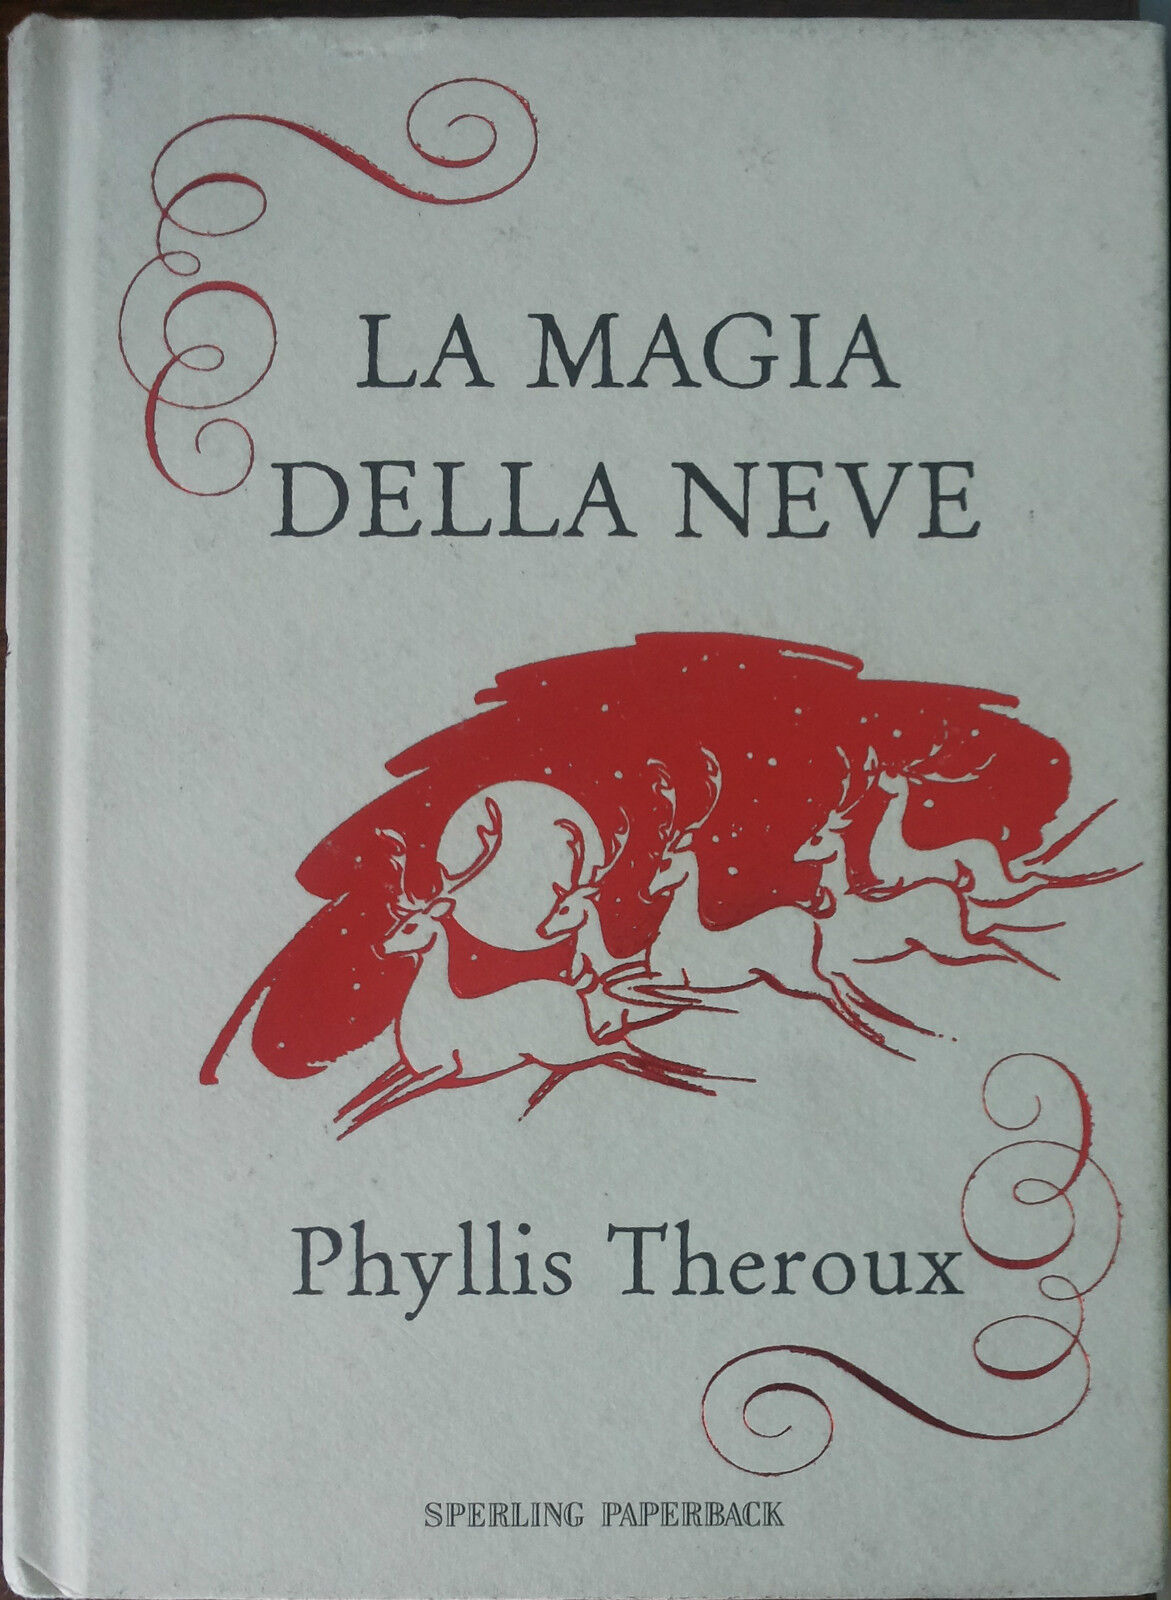 La magia della neve - Phyllis Theroux - Sperling & Kupfer,2009 - A